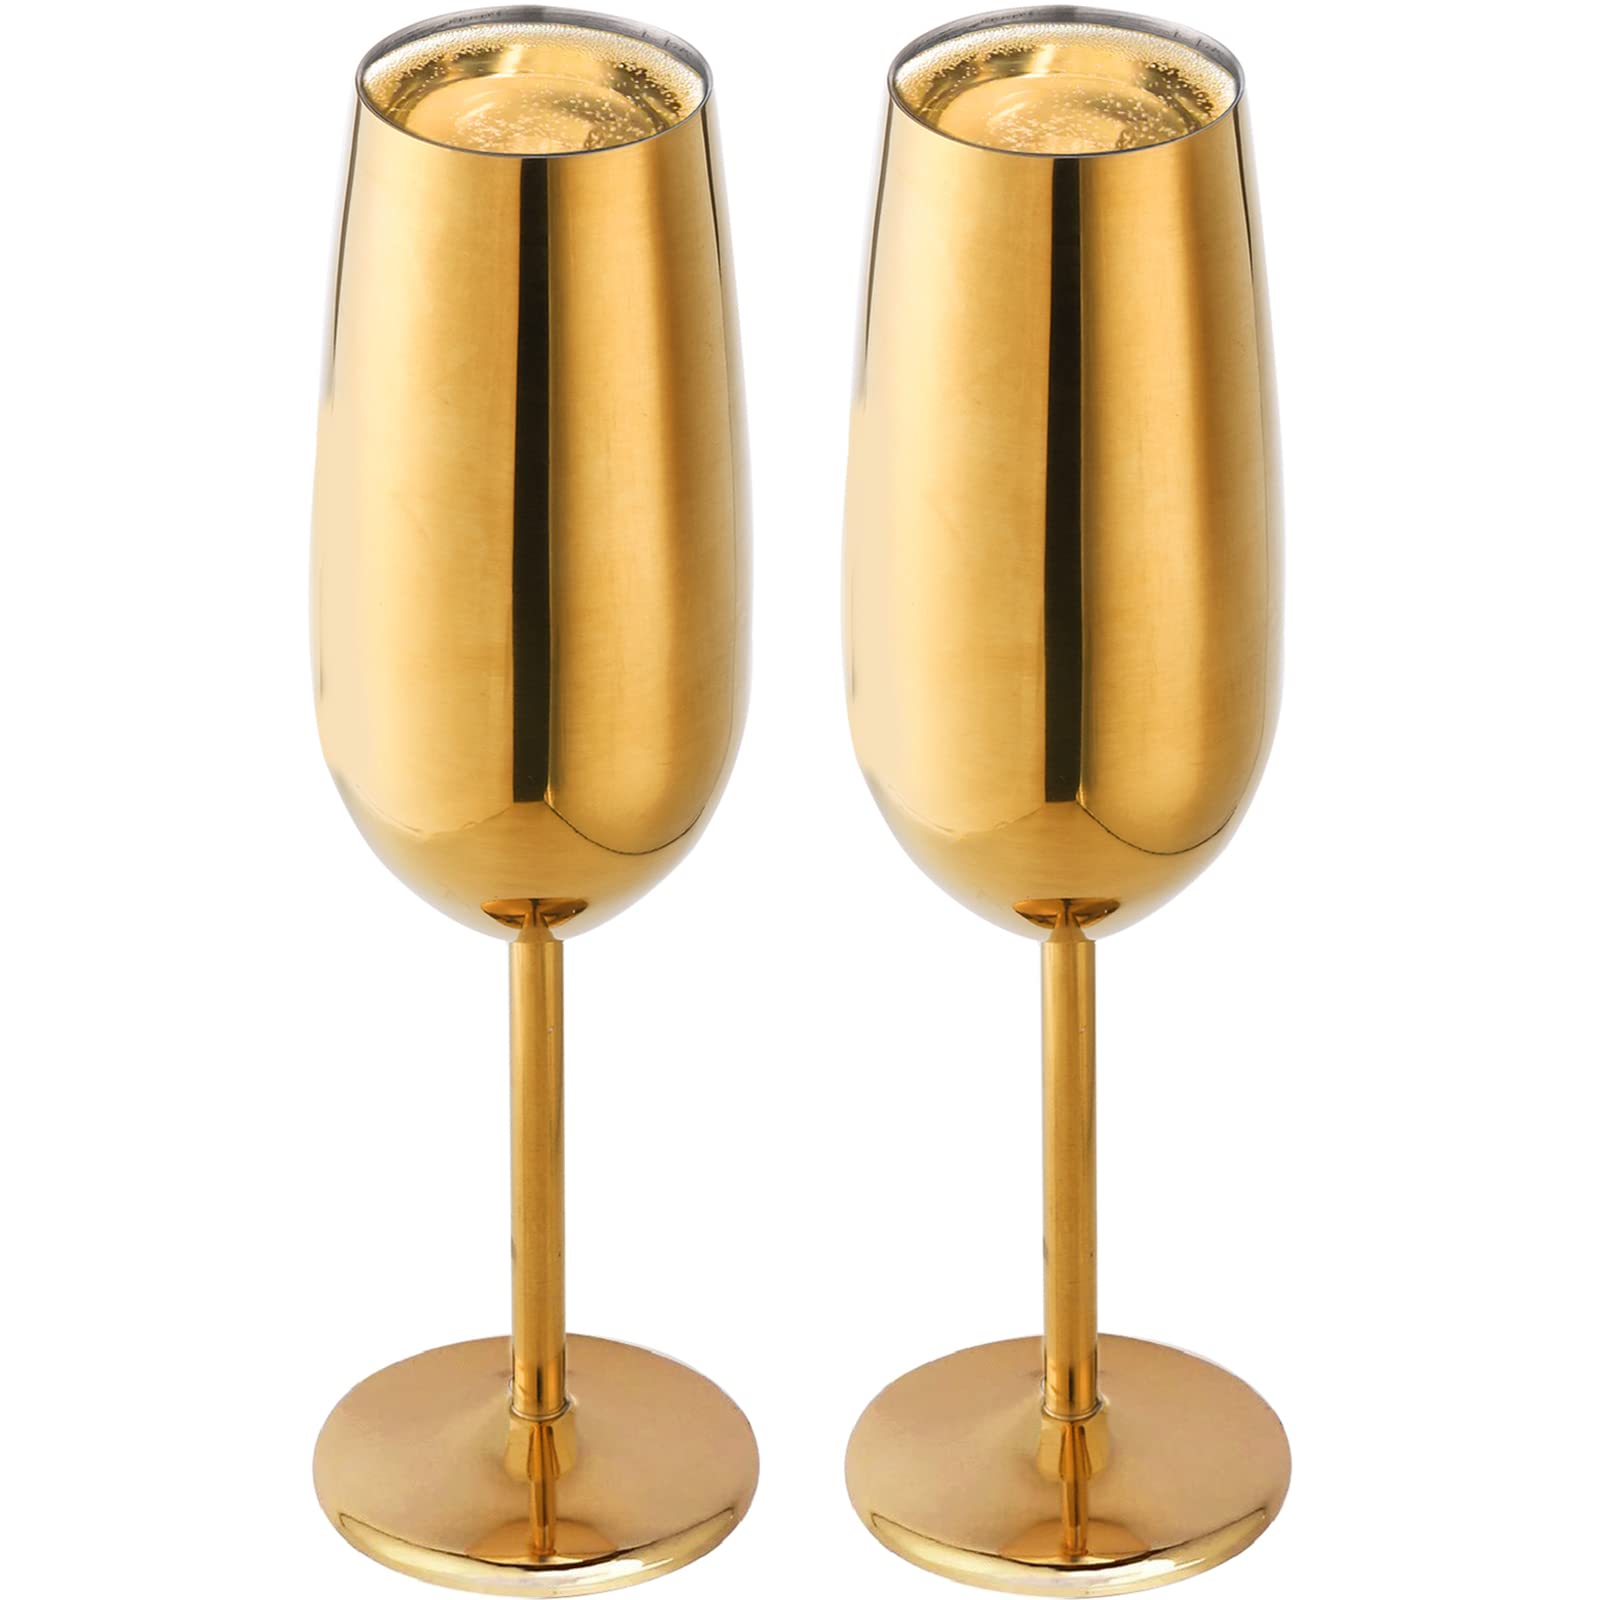 DEAYOU 2-Pack 18/10 Stainless Steel Champagne Glasses, Gold Metal Wine Goblet Cup for Cheers, Wedding, Party